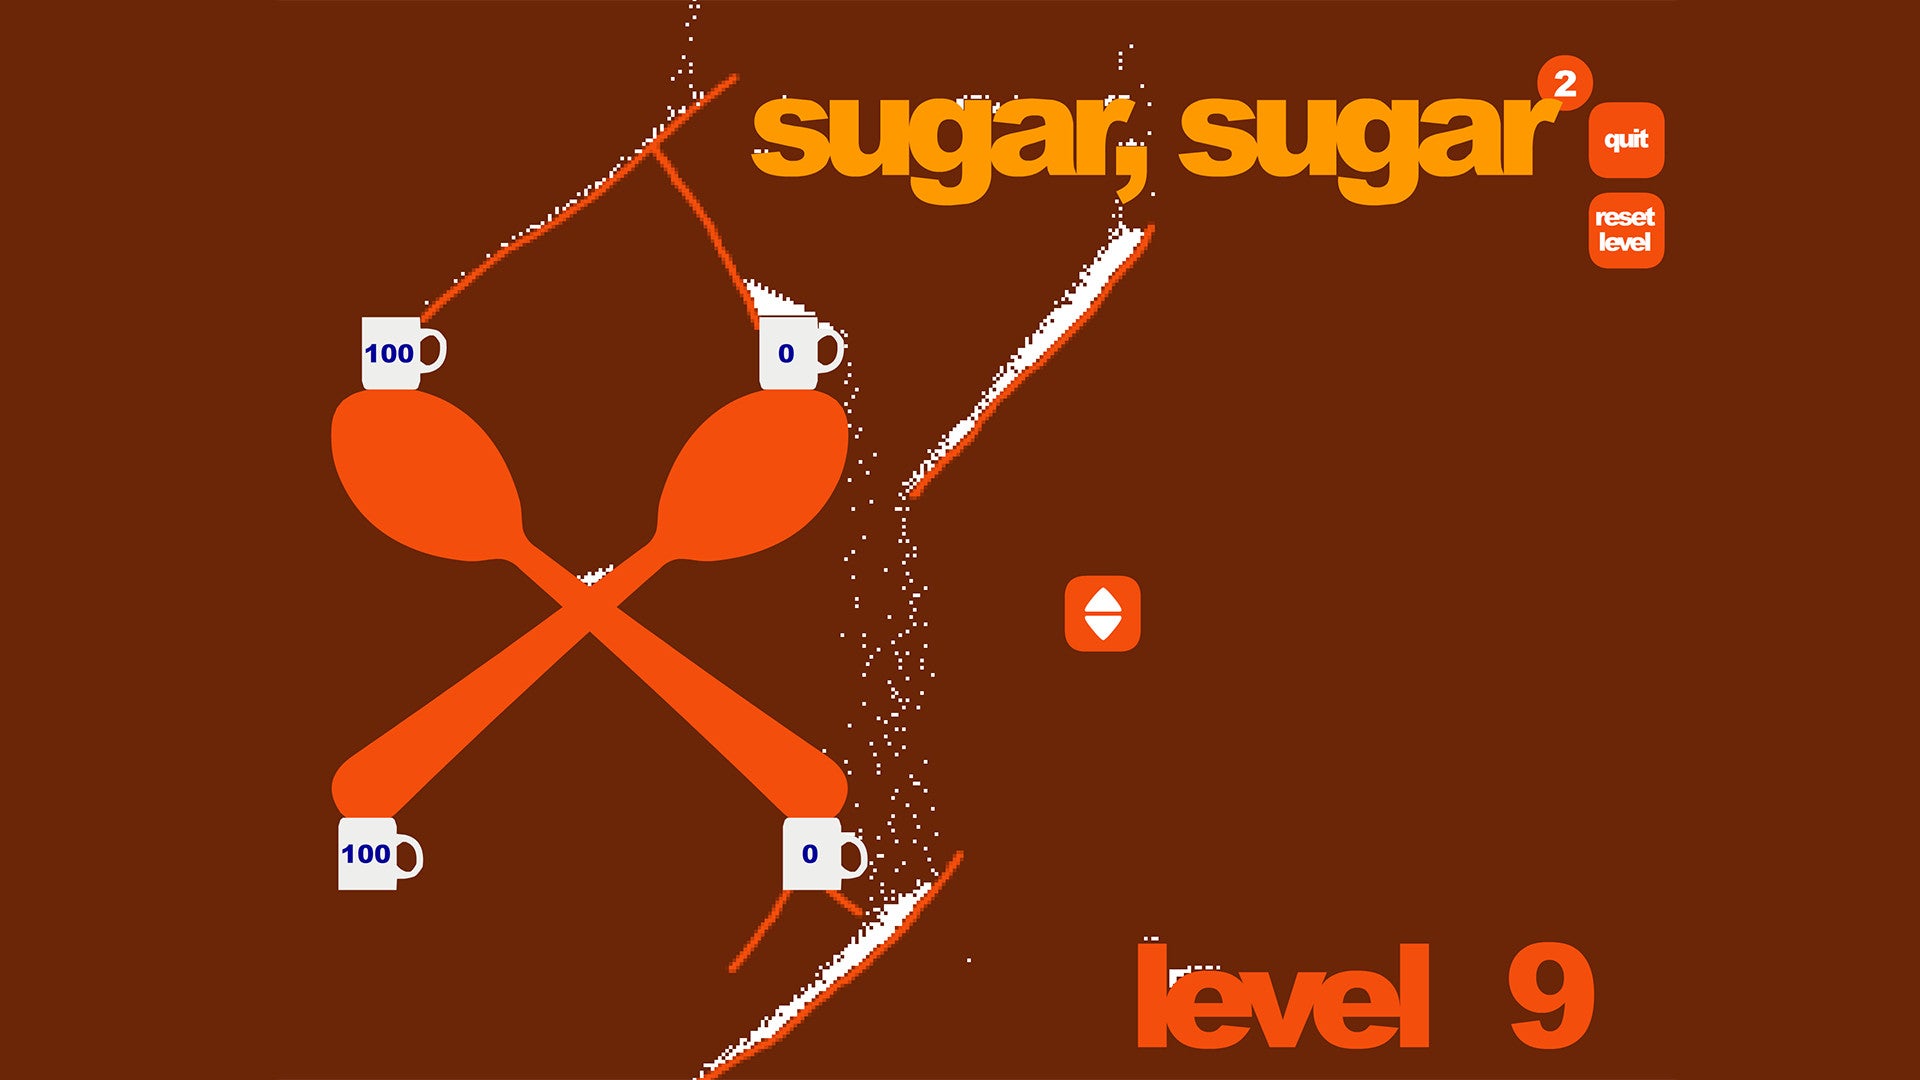 Sugar, Sugar - Two large spoons hold four cups. A player has drawn several different lines directing hundreds of grains of sugar into the cups from a single source.